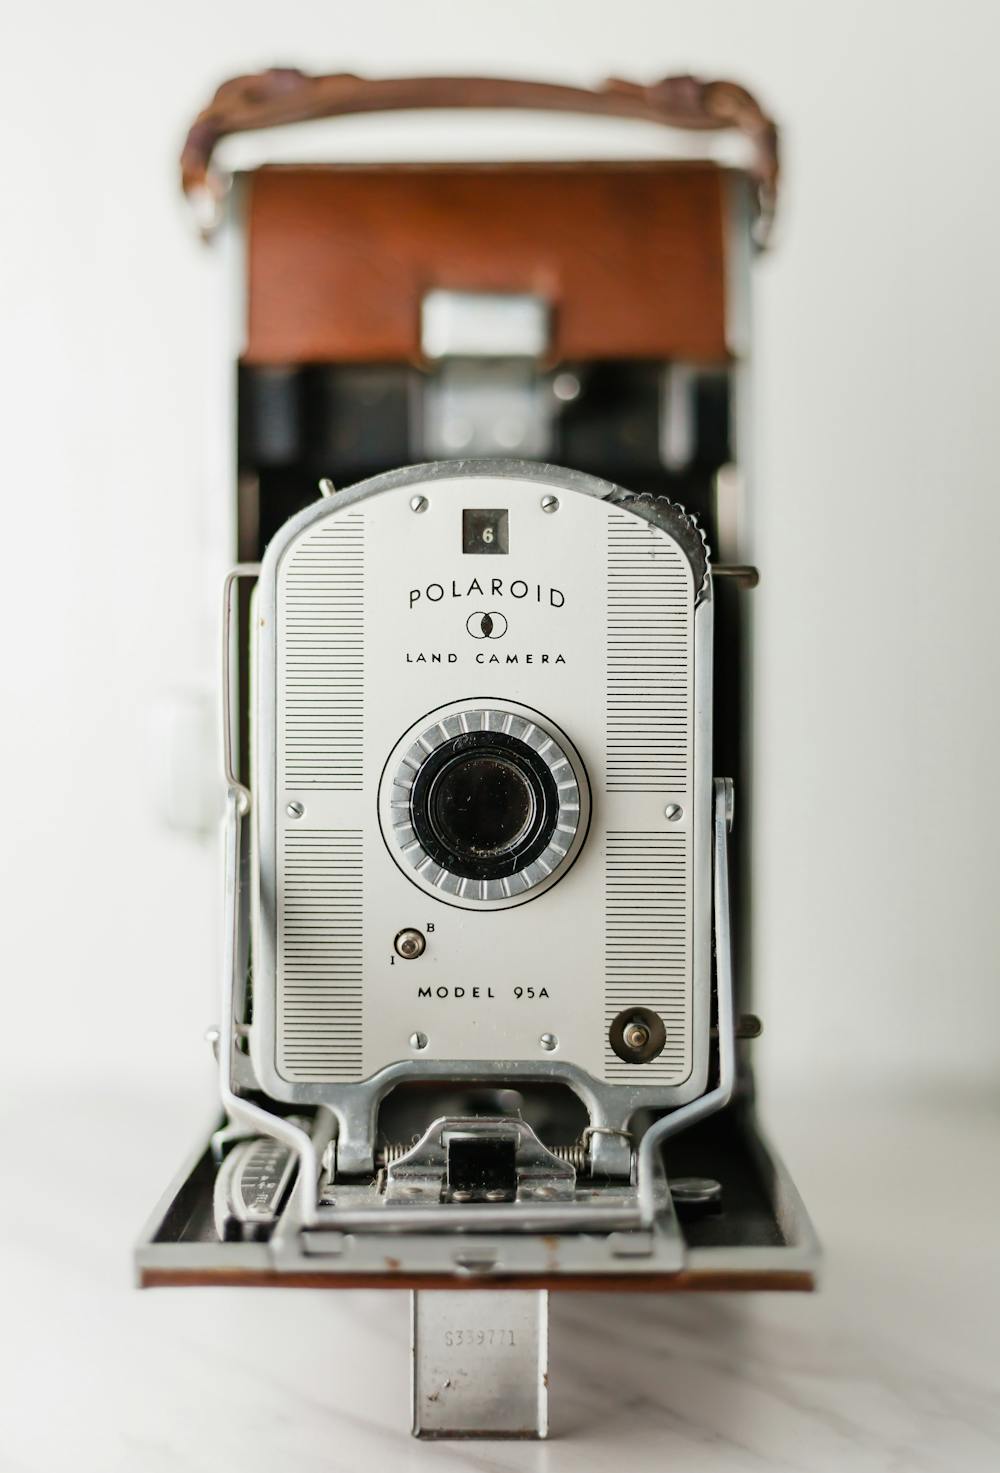 75 years of instant photos, thanks to inventor Edwin Land's camera